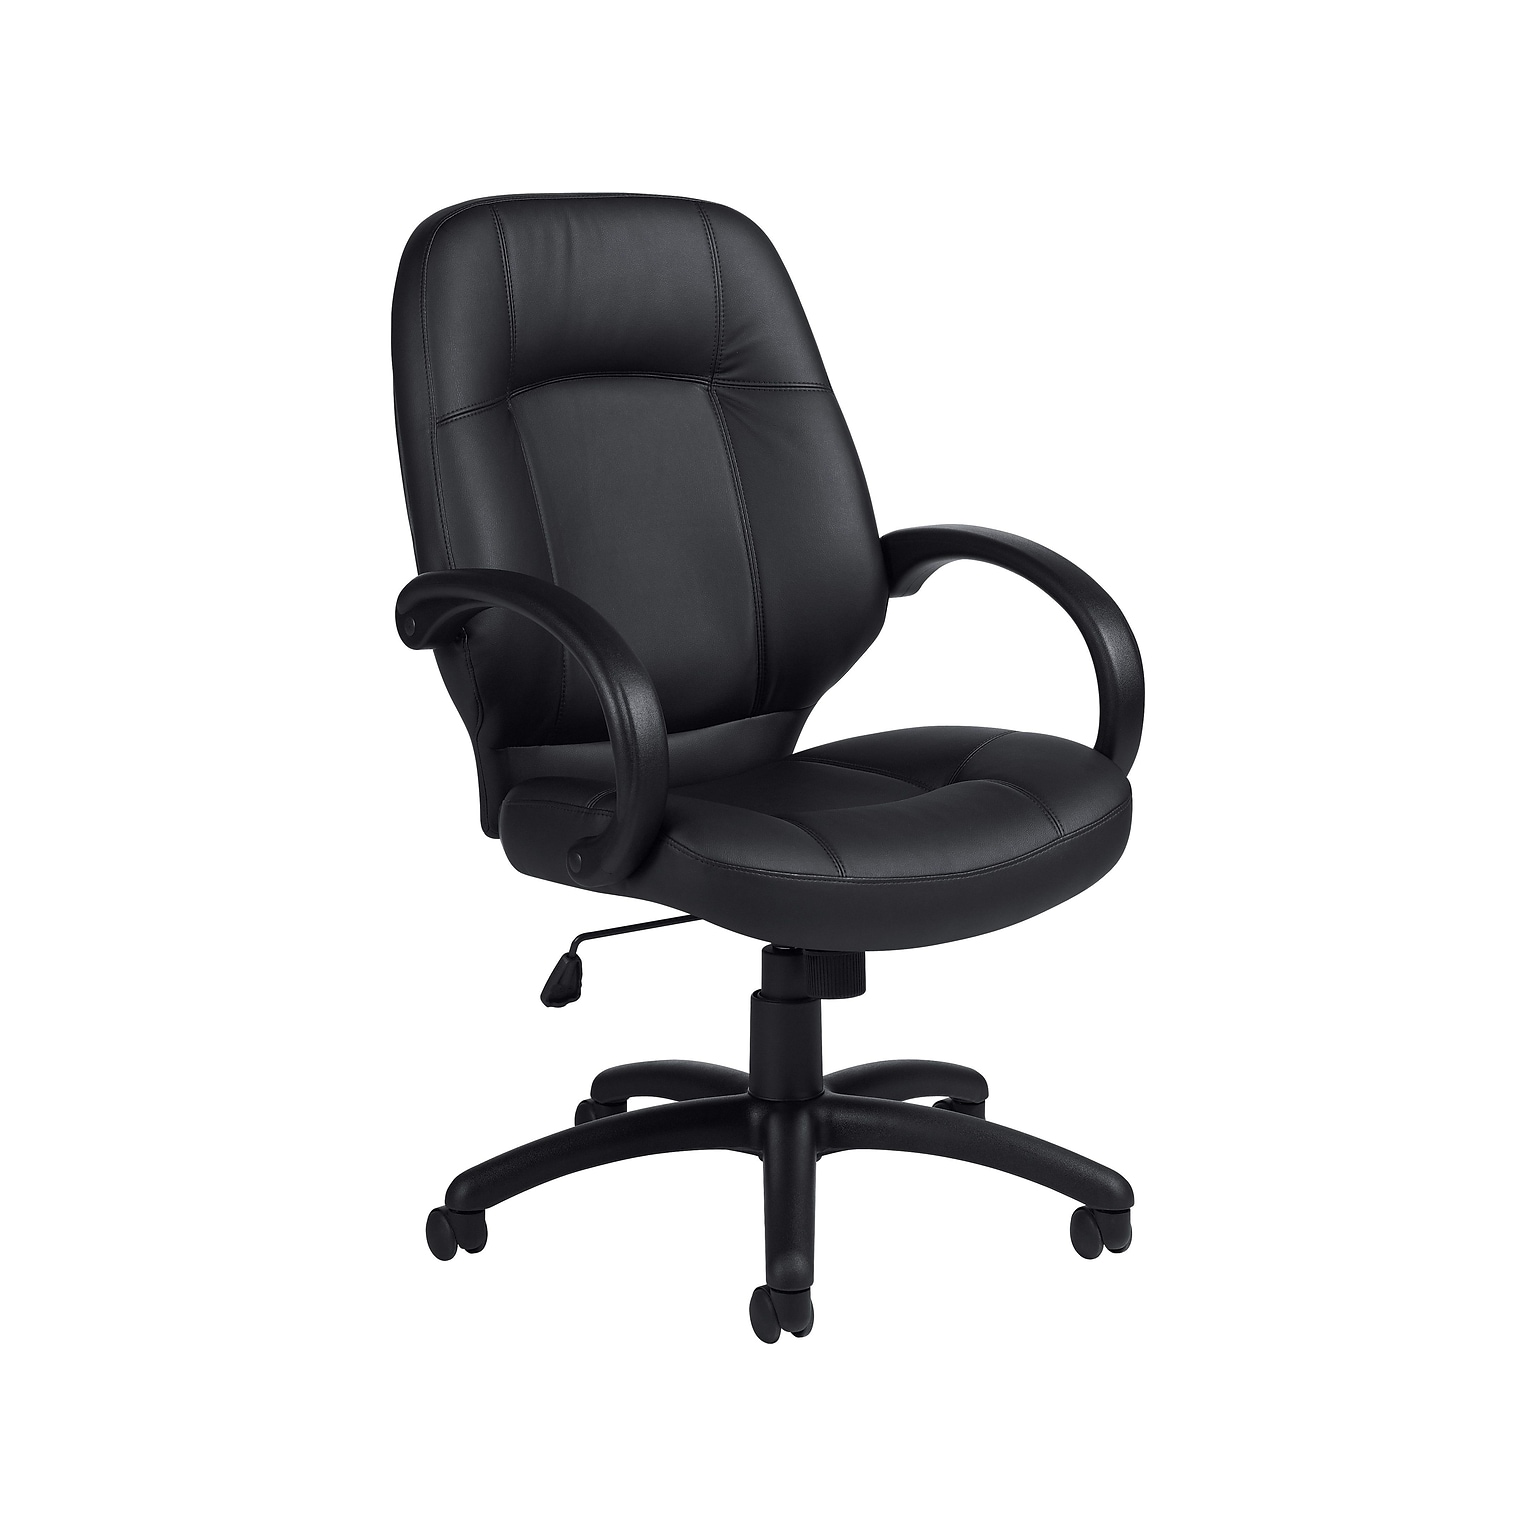 Offices To Go Luxhide Executive Chair, Black (OTG2788BL20)